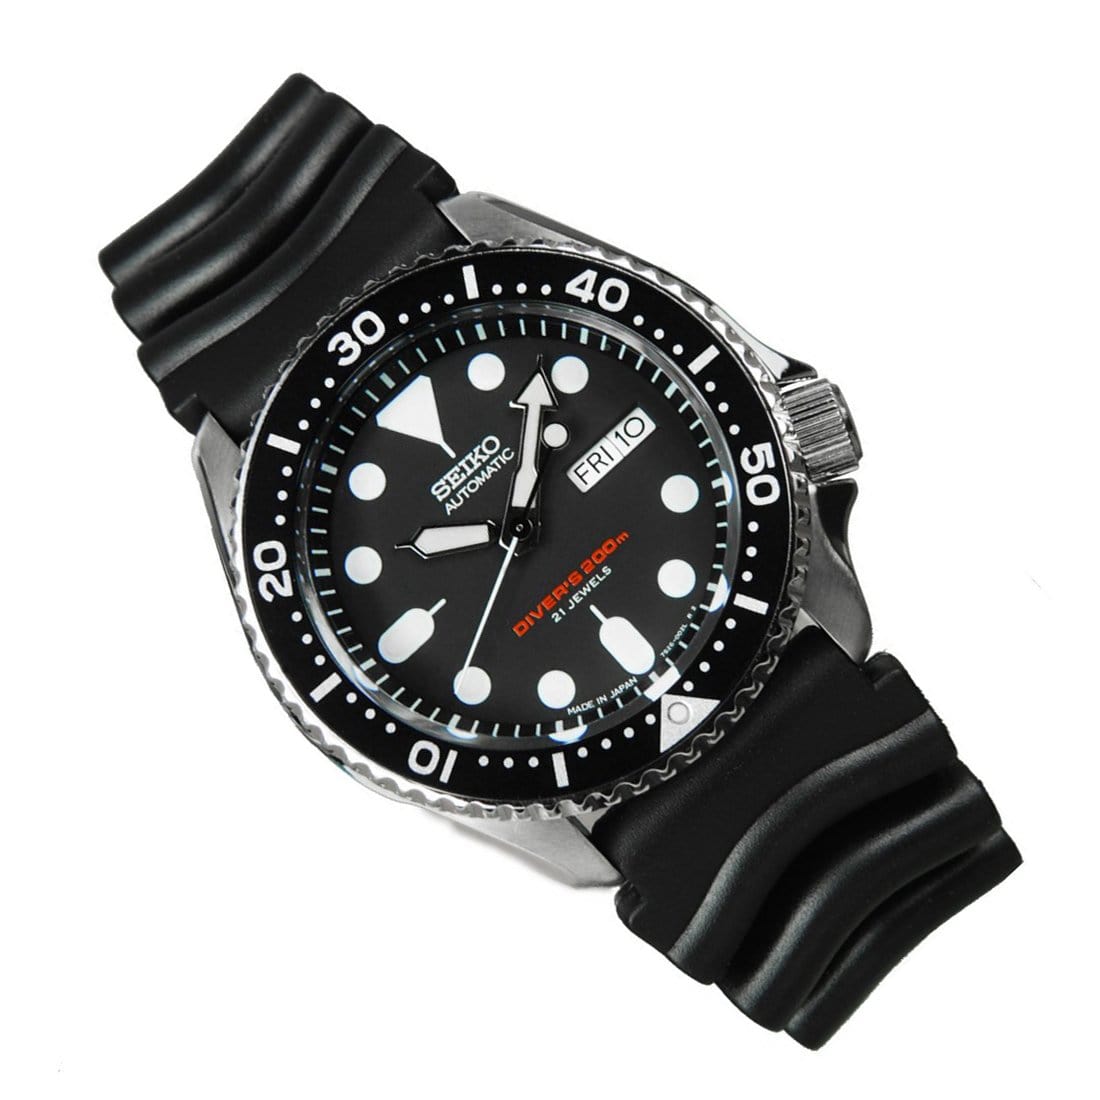 Seiko Divers Automatic Watch SKX007 SKX007J1 with Extra Stainless Mesh Strap